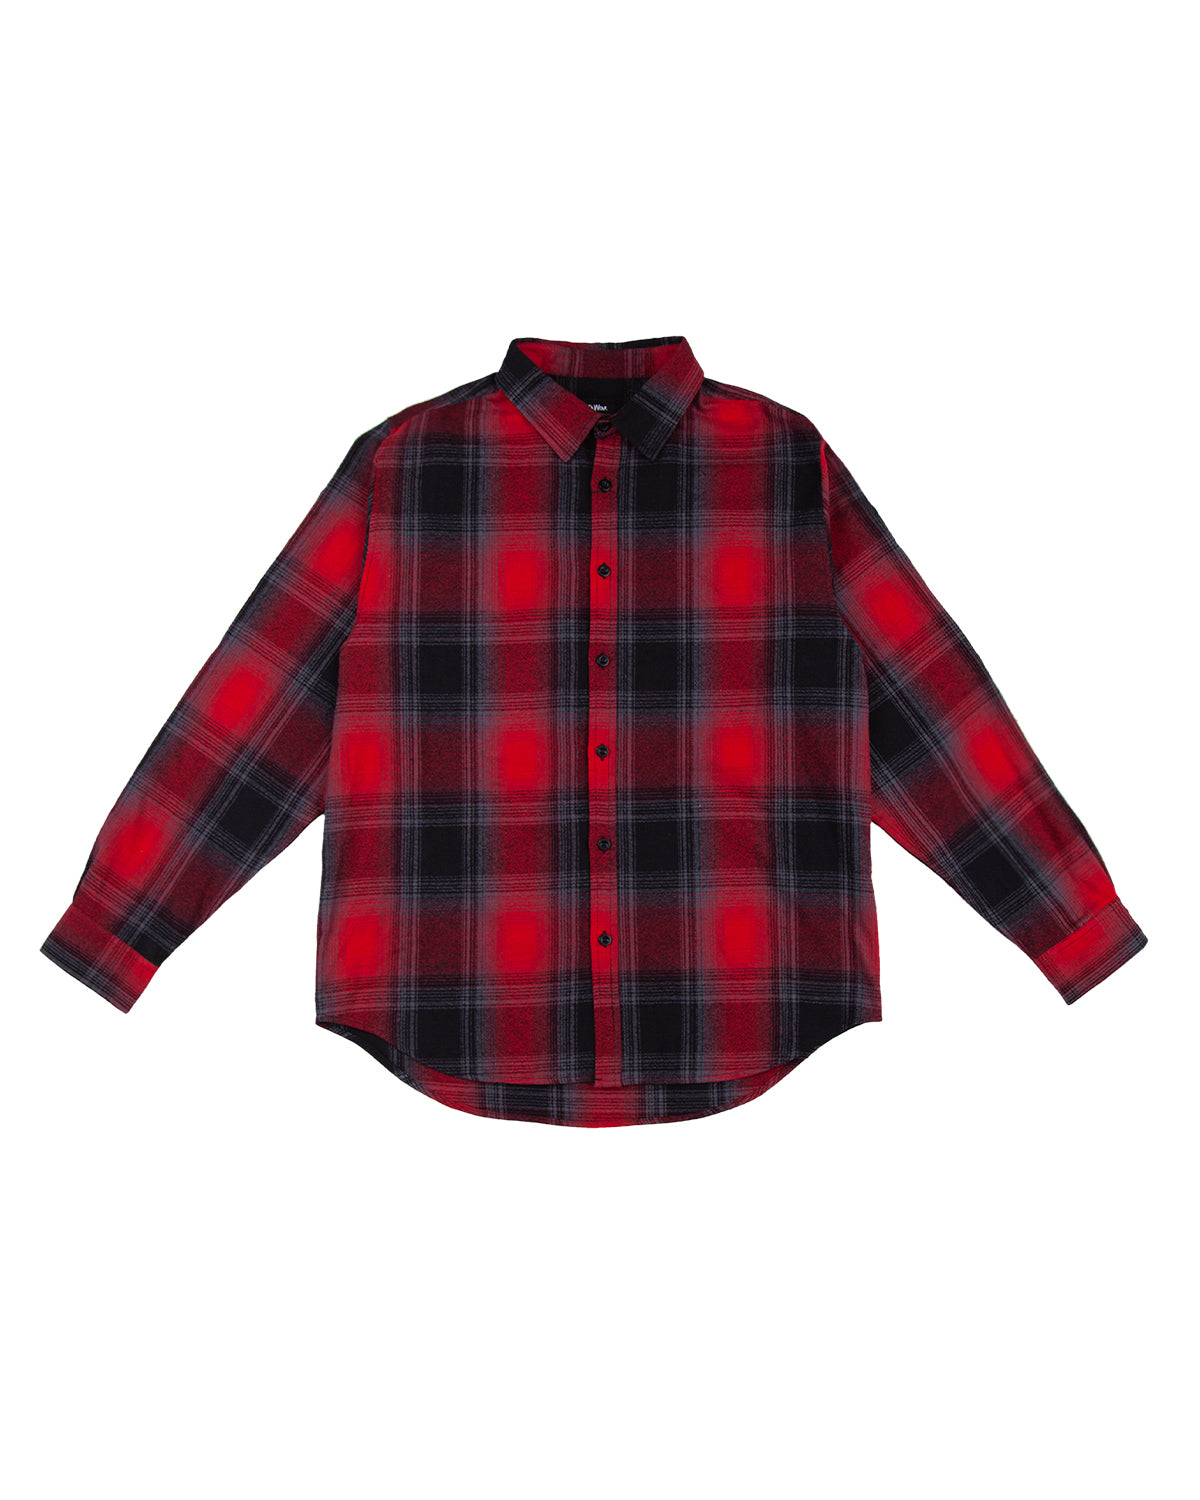 Black, White and Red Plaid Oversized Flannel | Bmaes Boutique Small